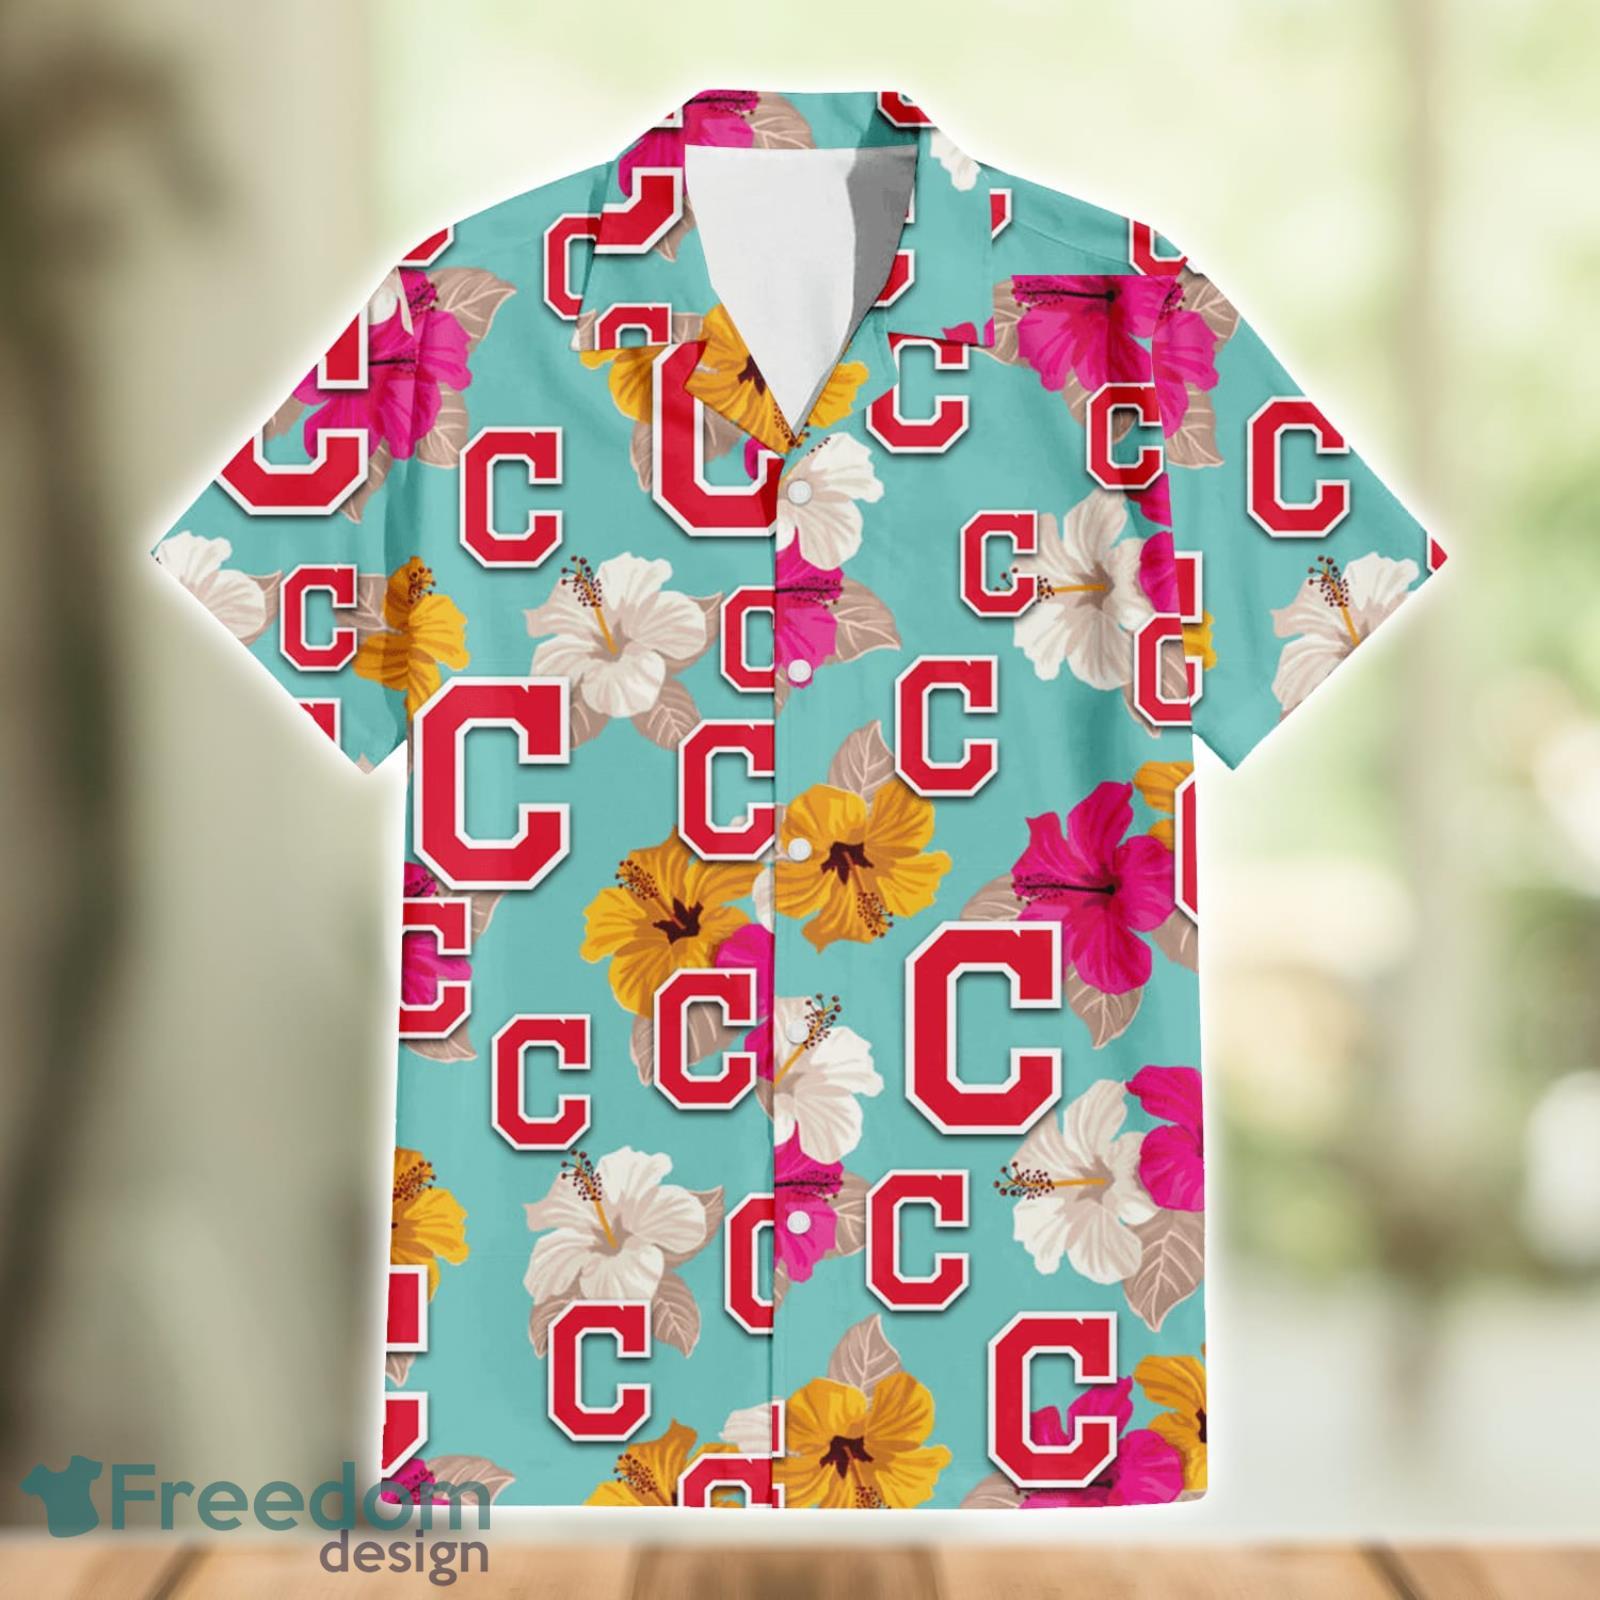 Chicago Cubs Pink Yellow White Hibiscus Pattern Tropical Hawaiian Shirt -  Freedomdesign